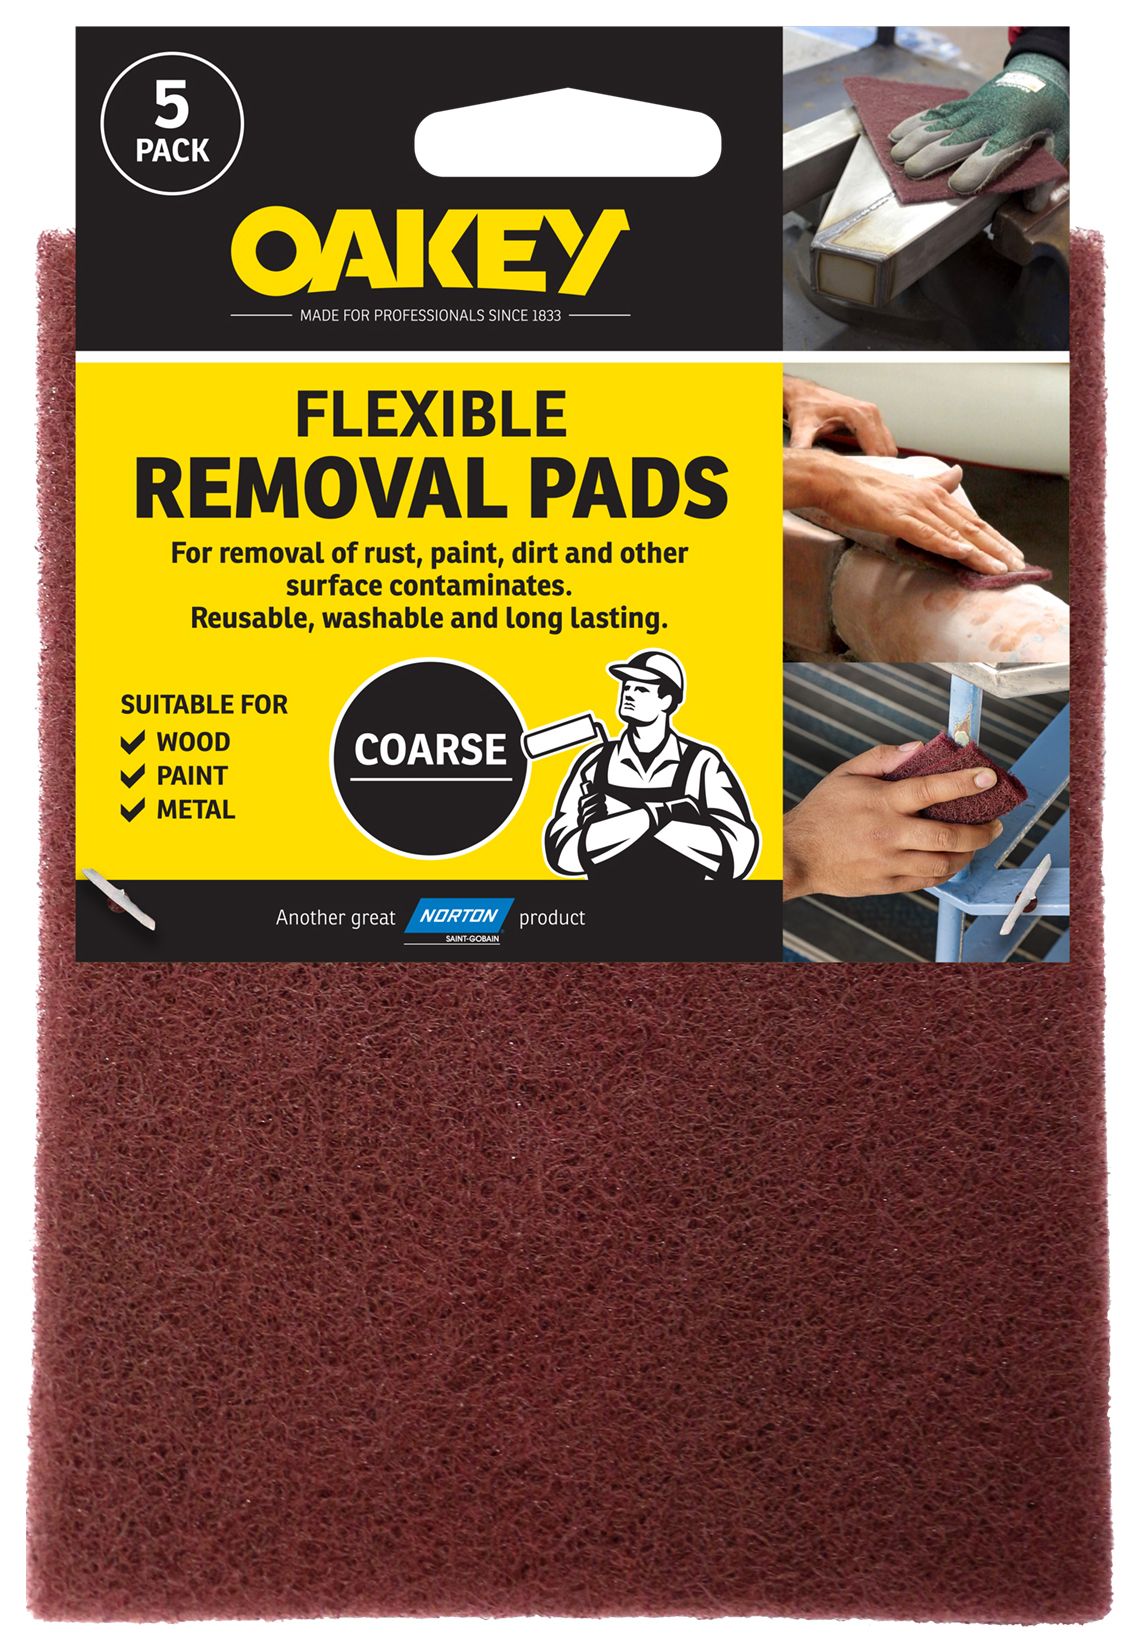 Image of Oakey Flexible Removal Pads - Pack of 5